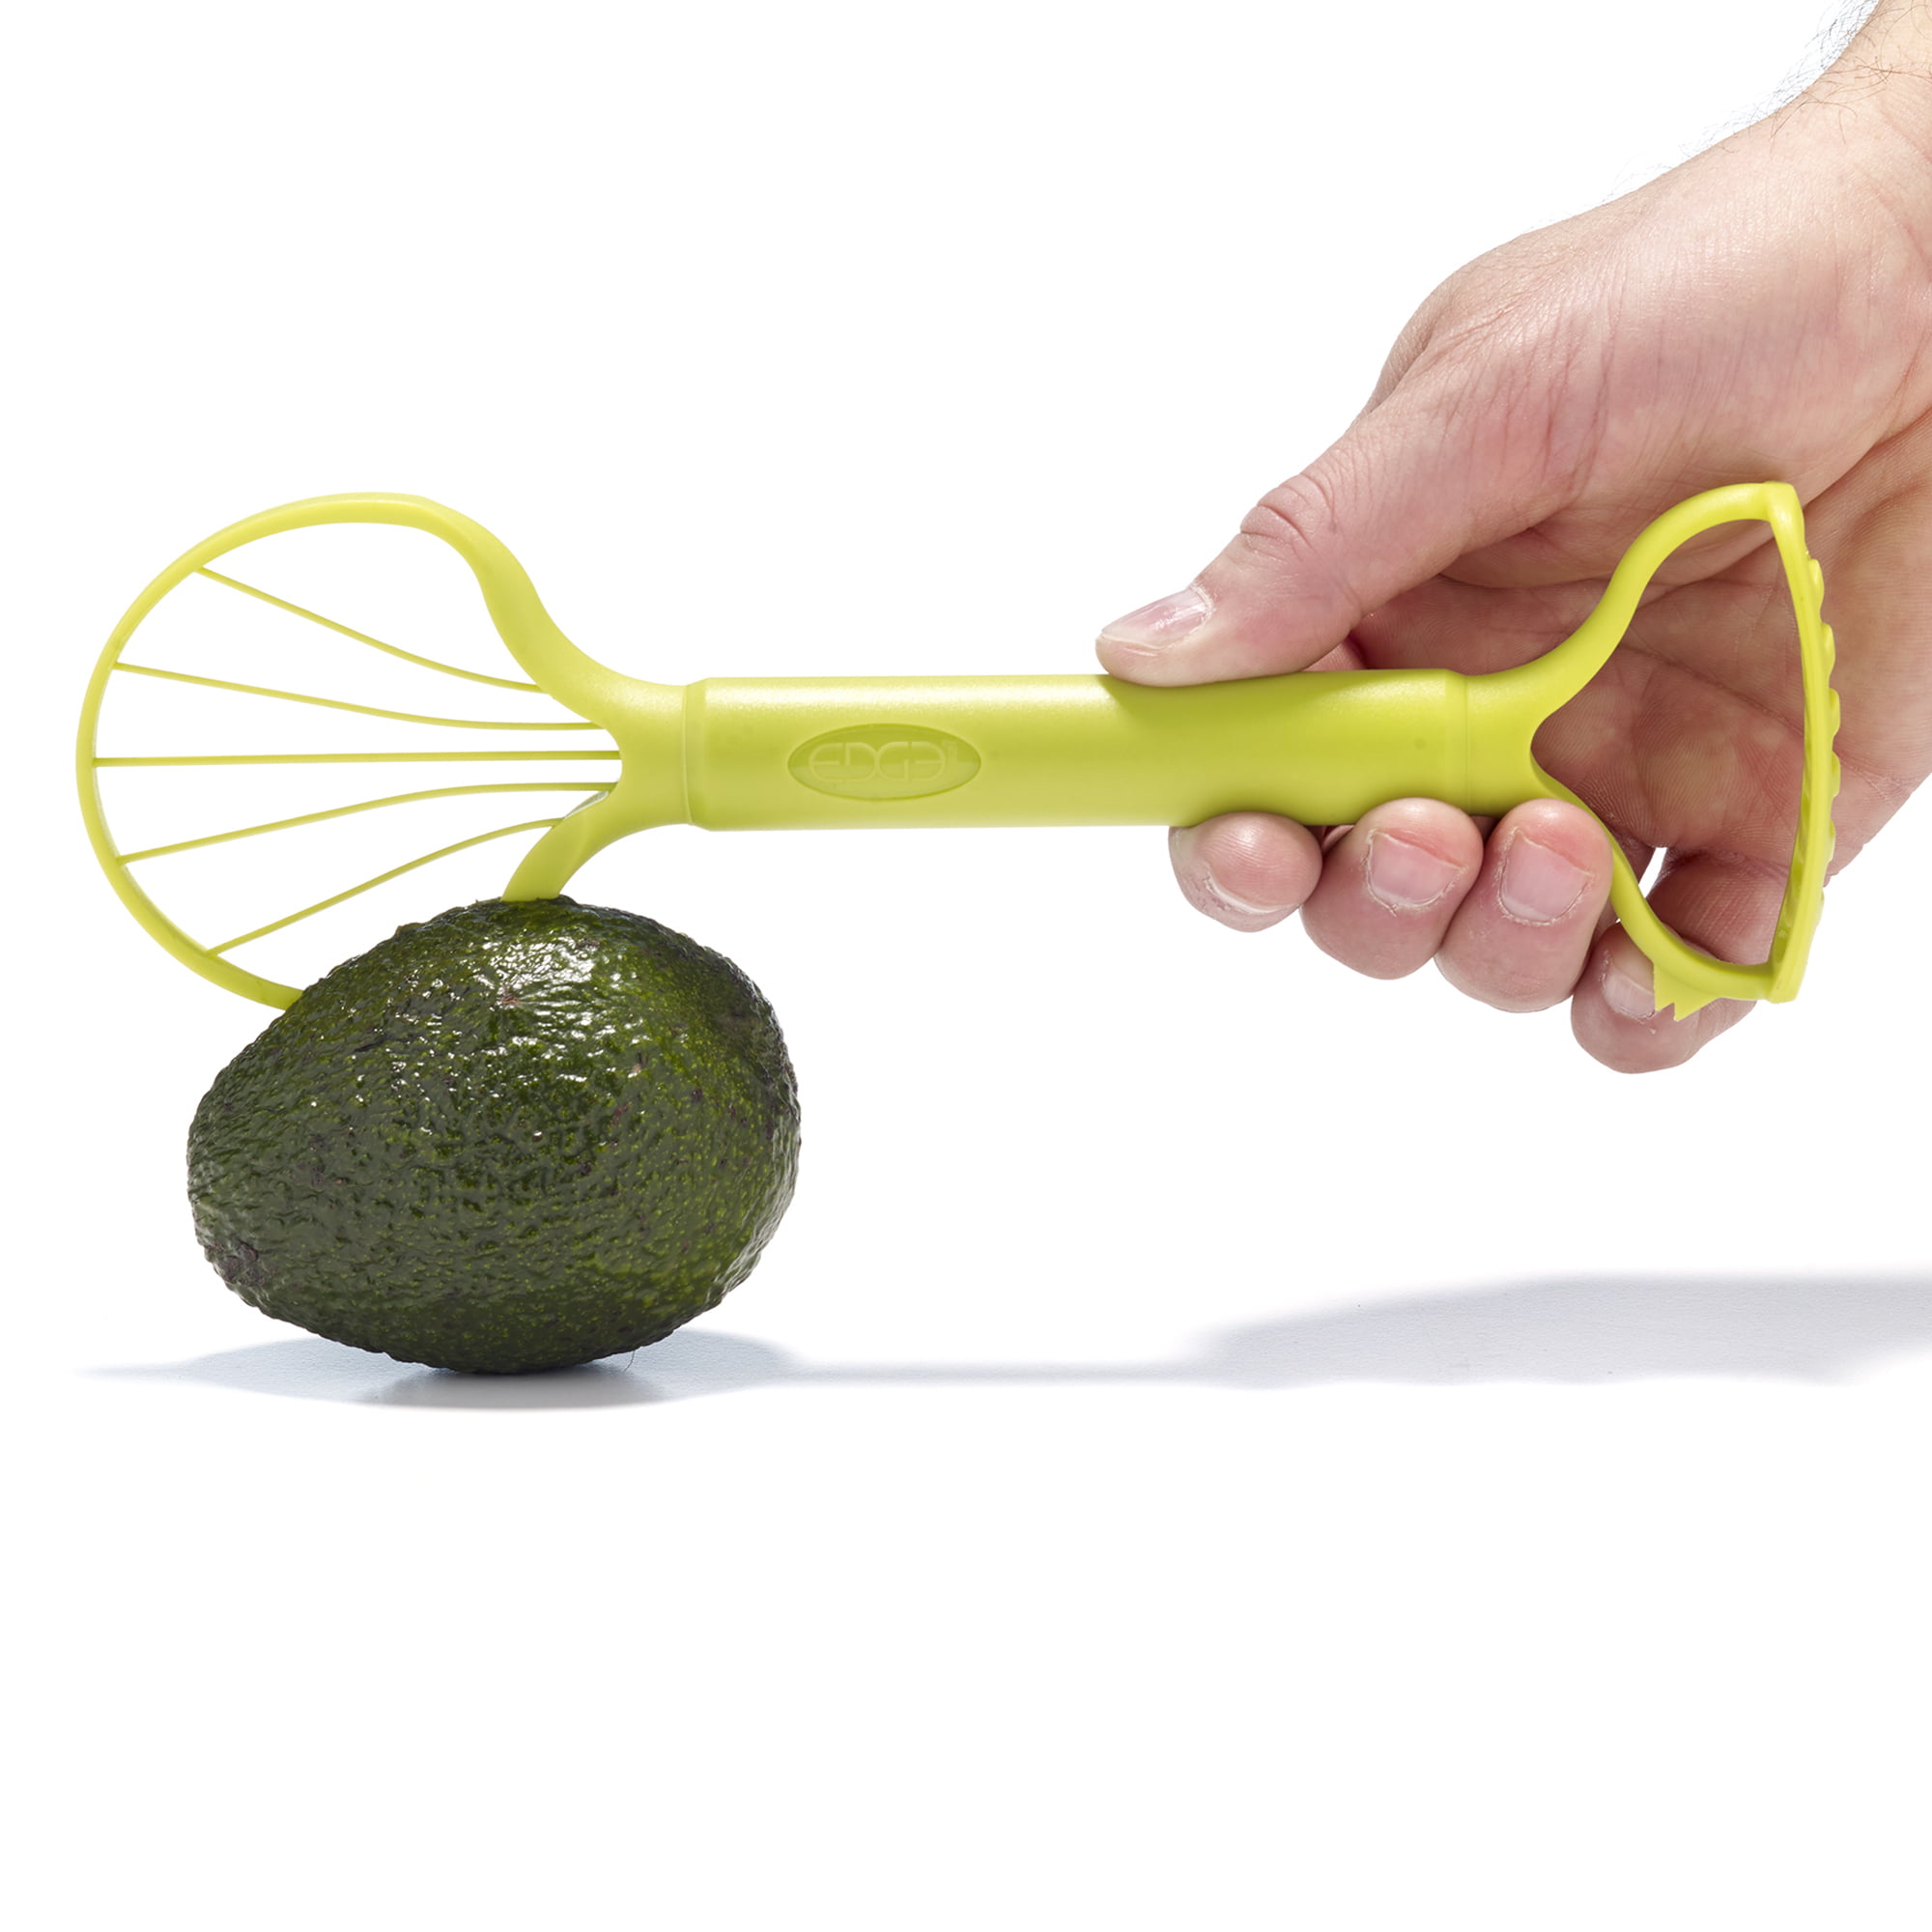 All in one avocadore avocado cutter and peeler - FortShpejt